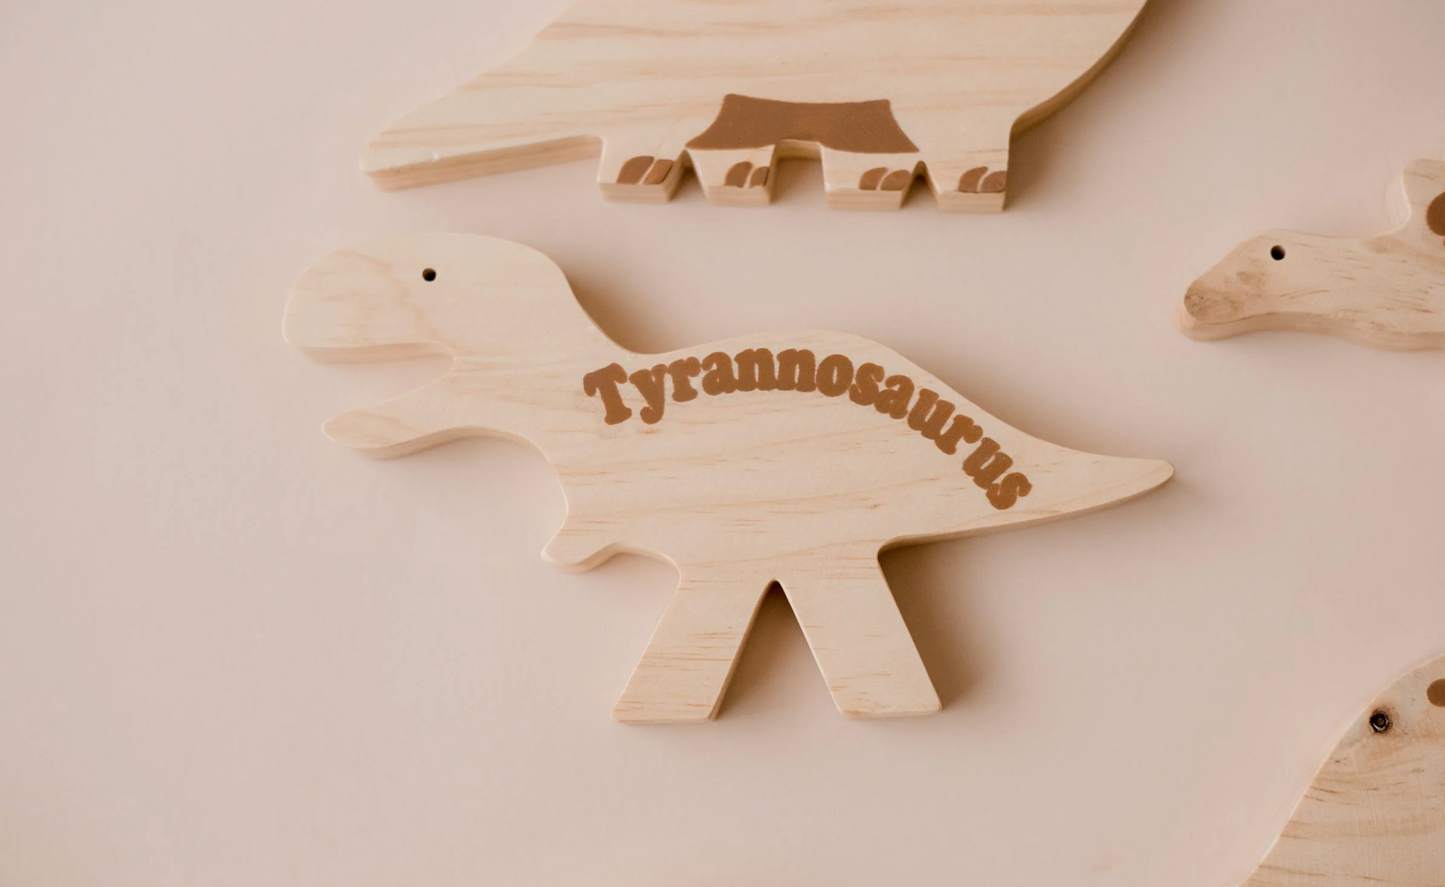 Load image into Gallery viewer, QToys - Wooden Dinosaurs (Set of 5)
